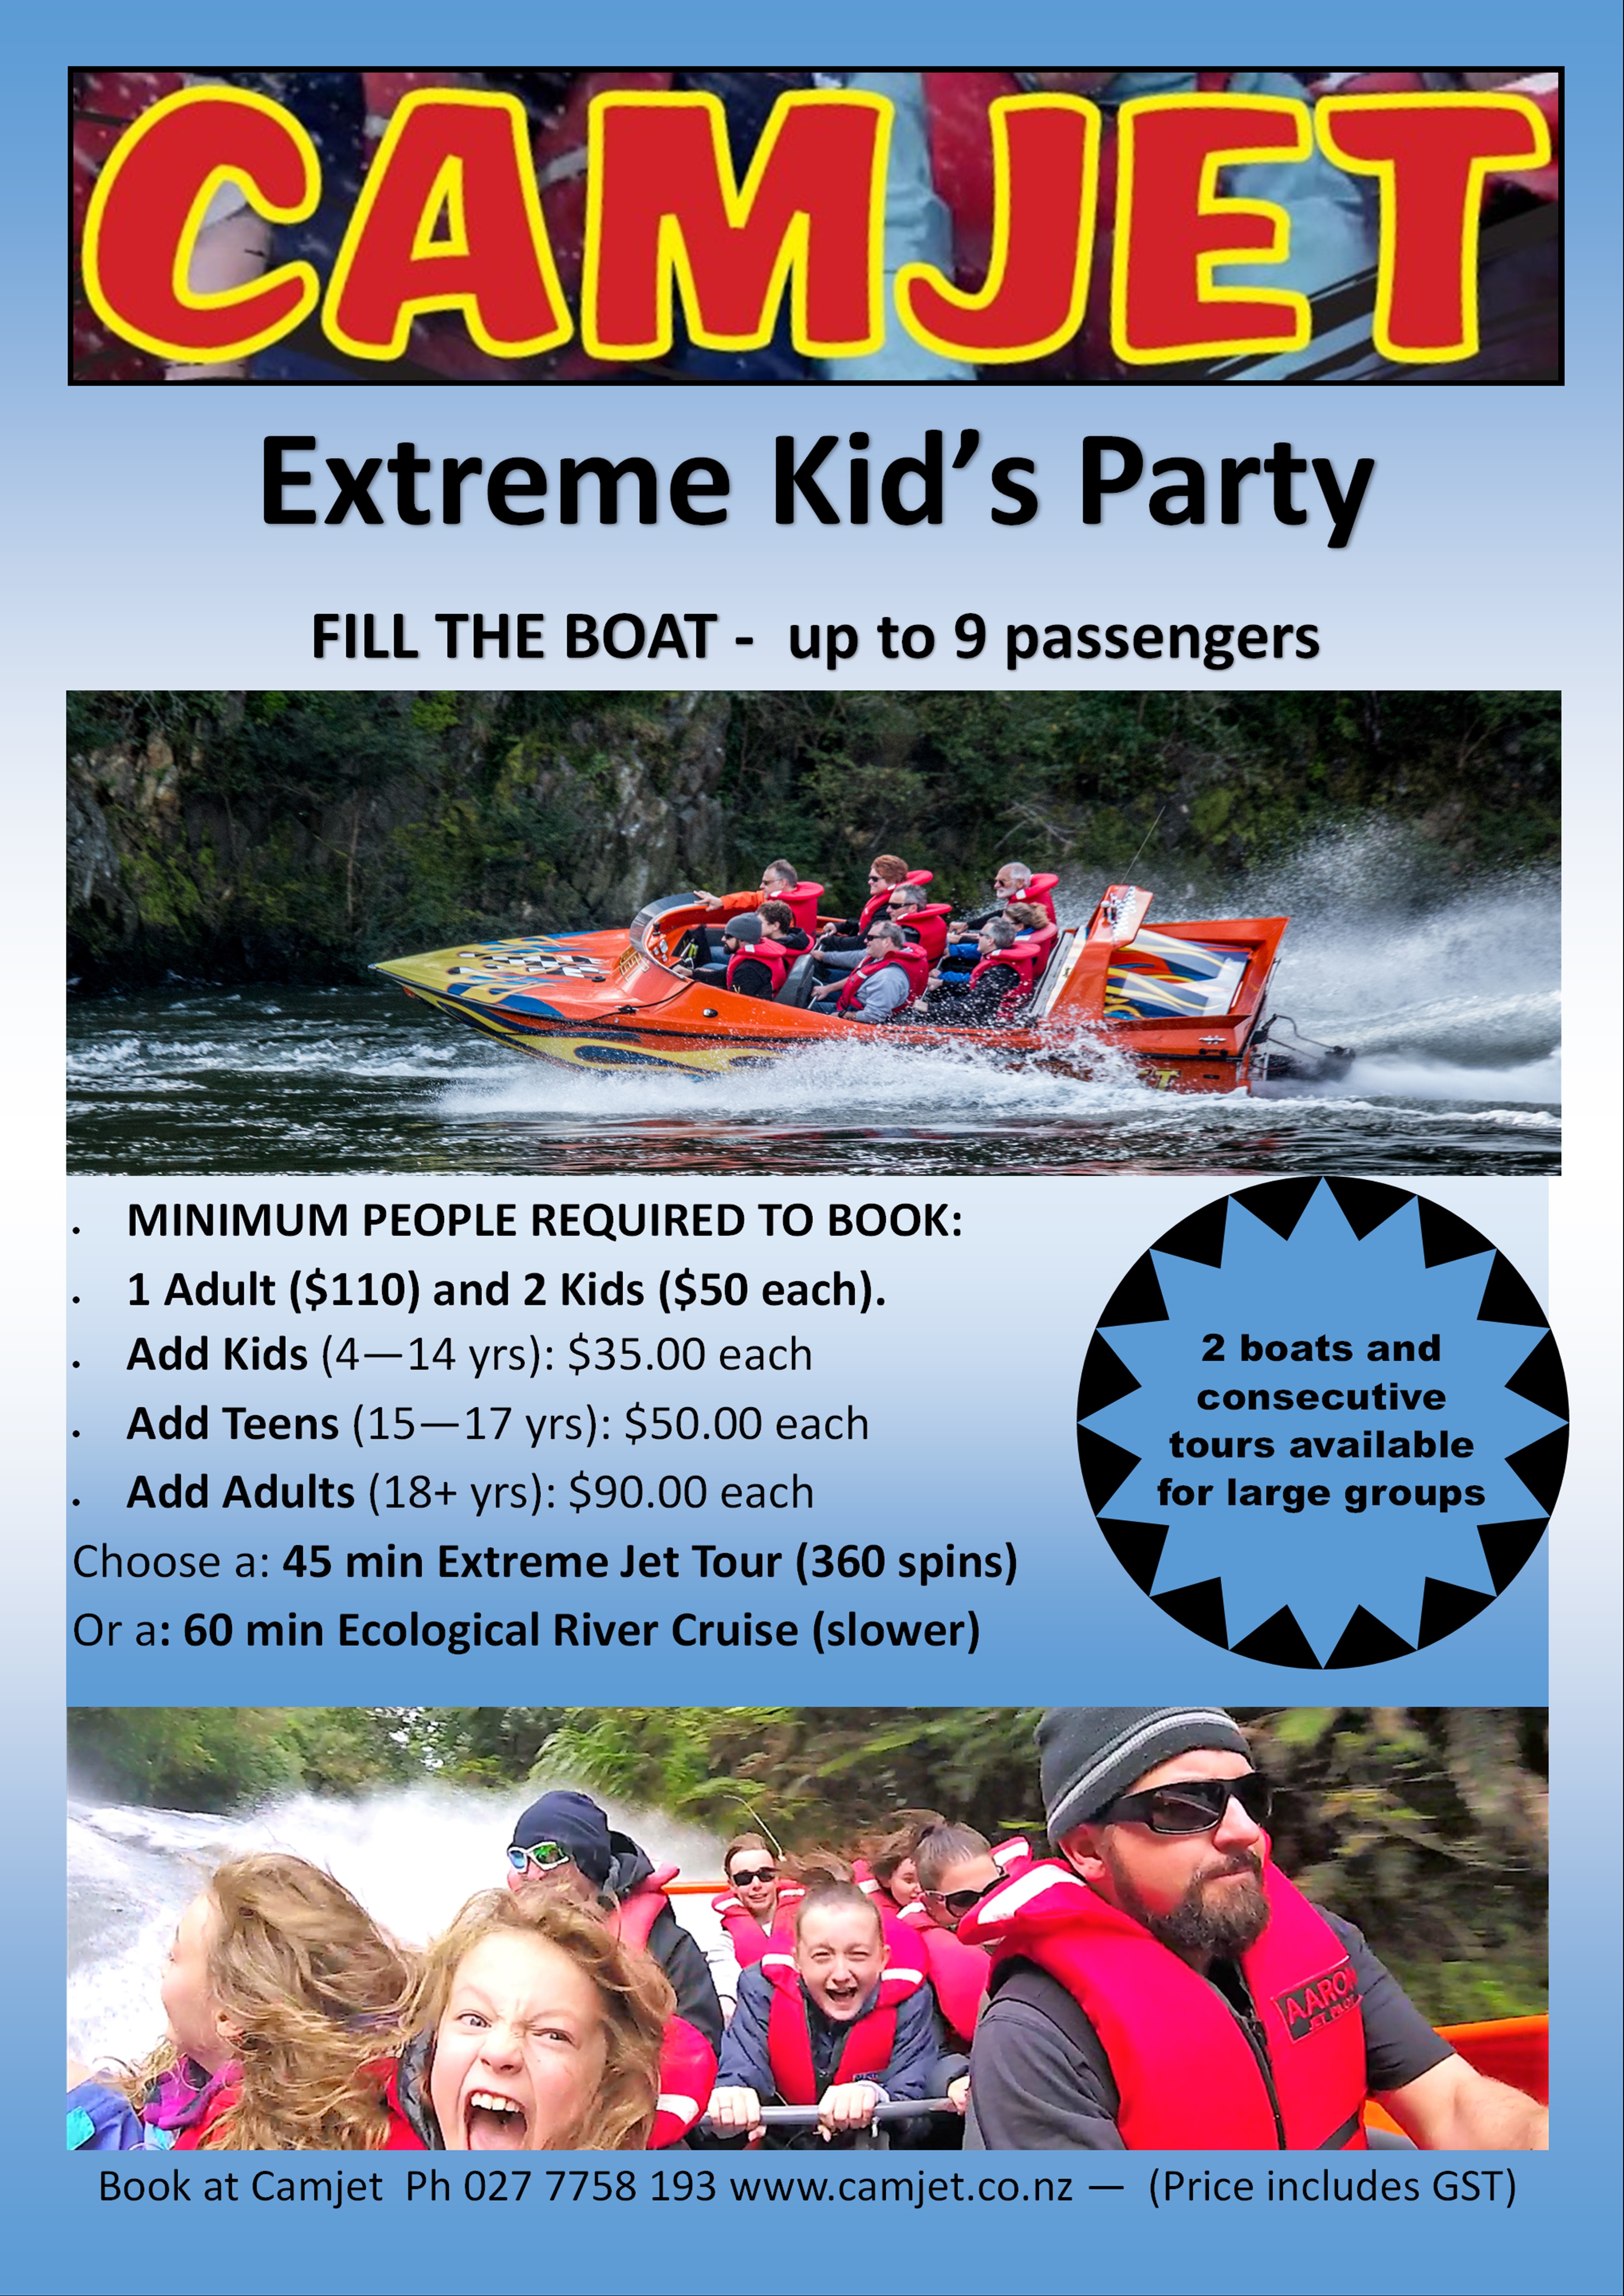 Camjet extreme kids party poster with Camjet boats with kids on them